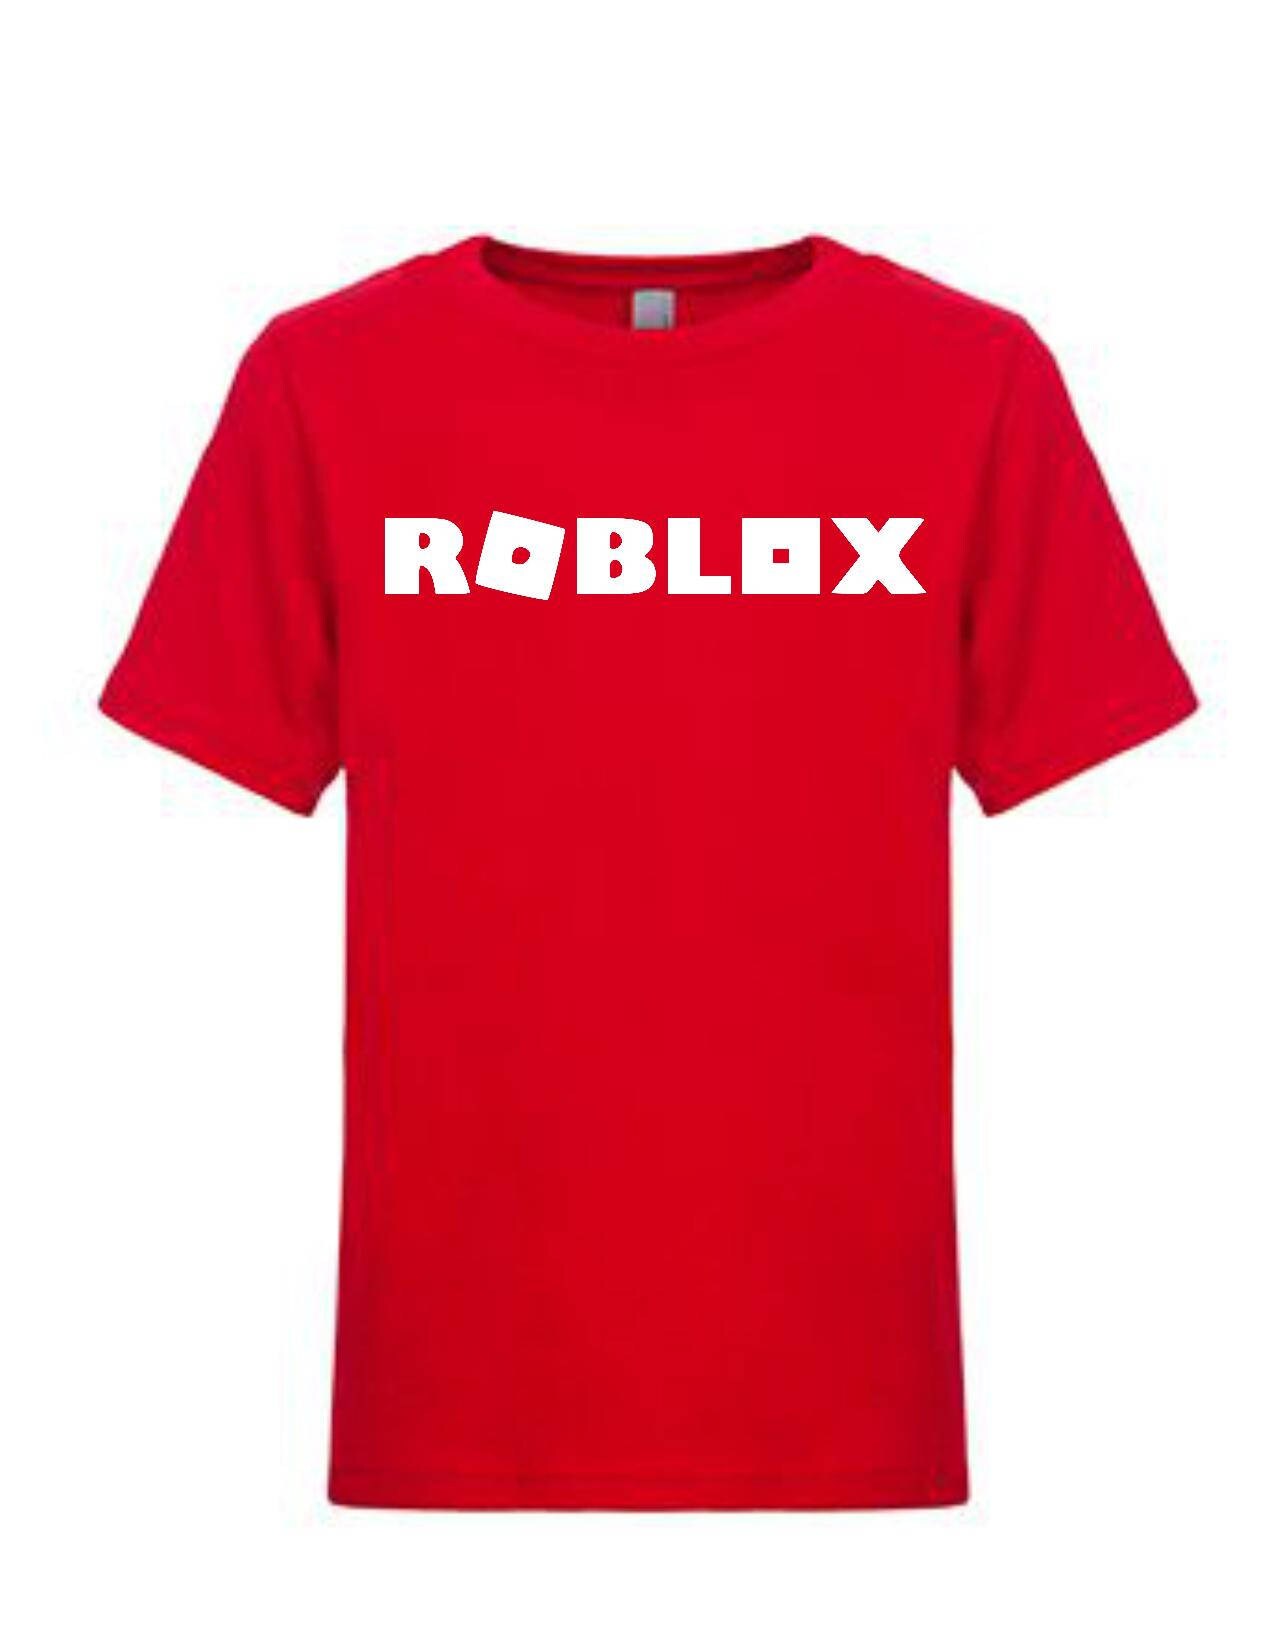 Roblox Game Shirt Gift for Child Gift for Kid Gift for | Etsy